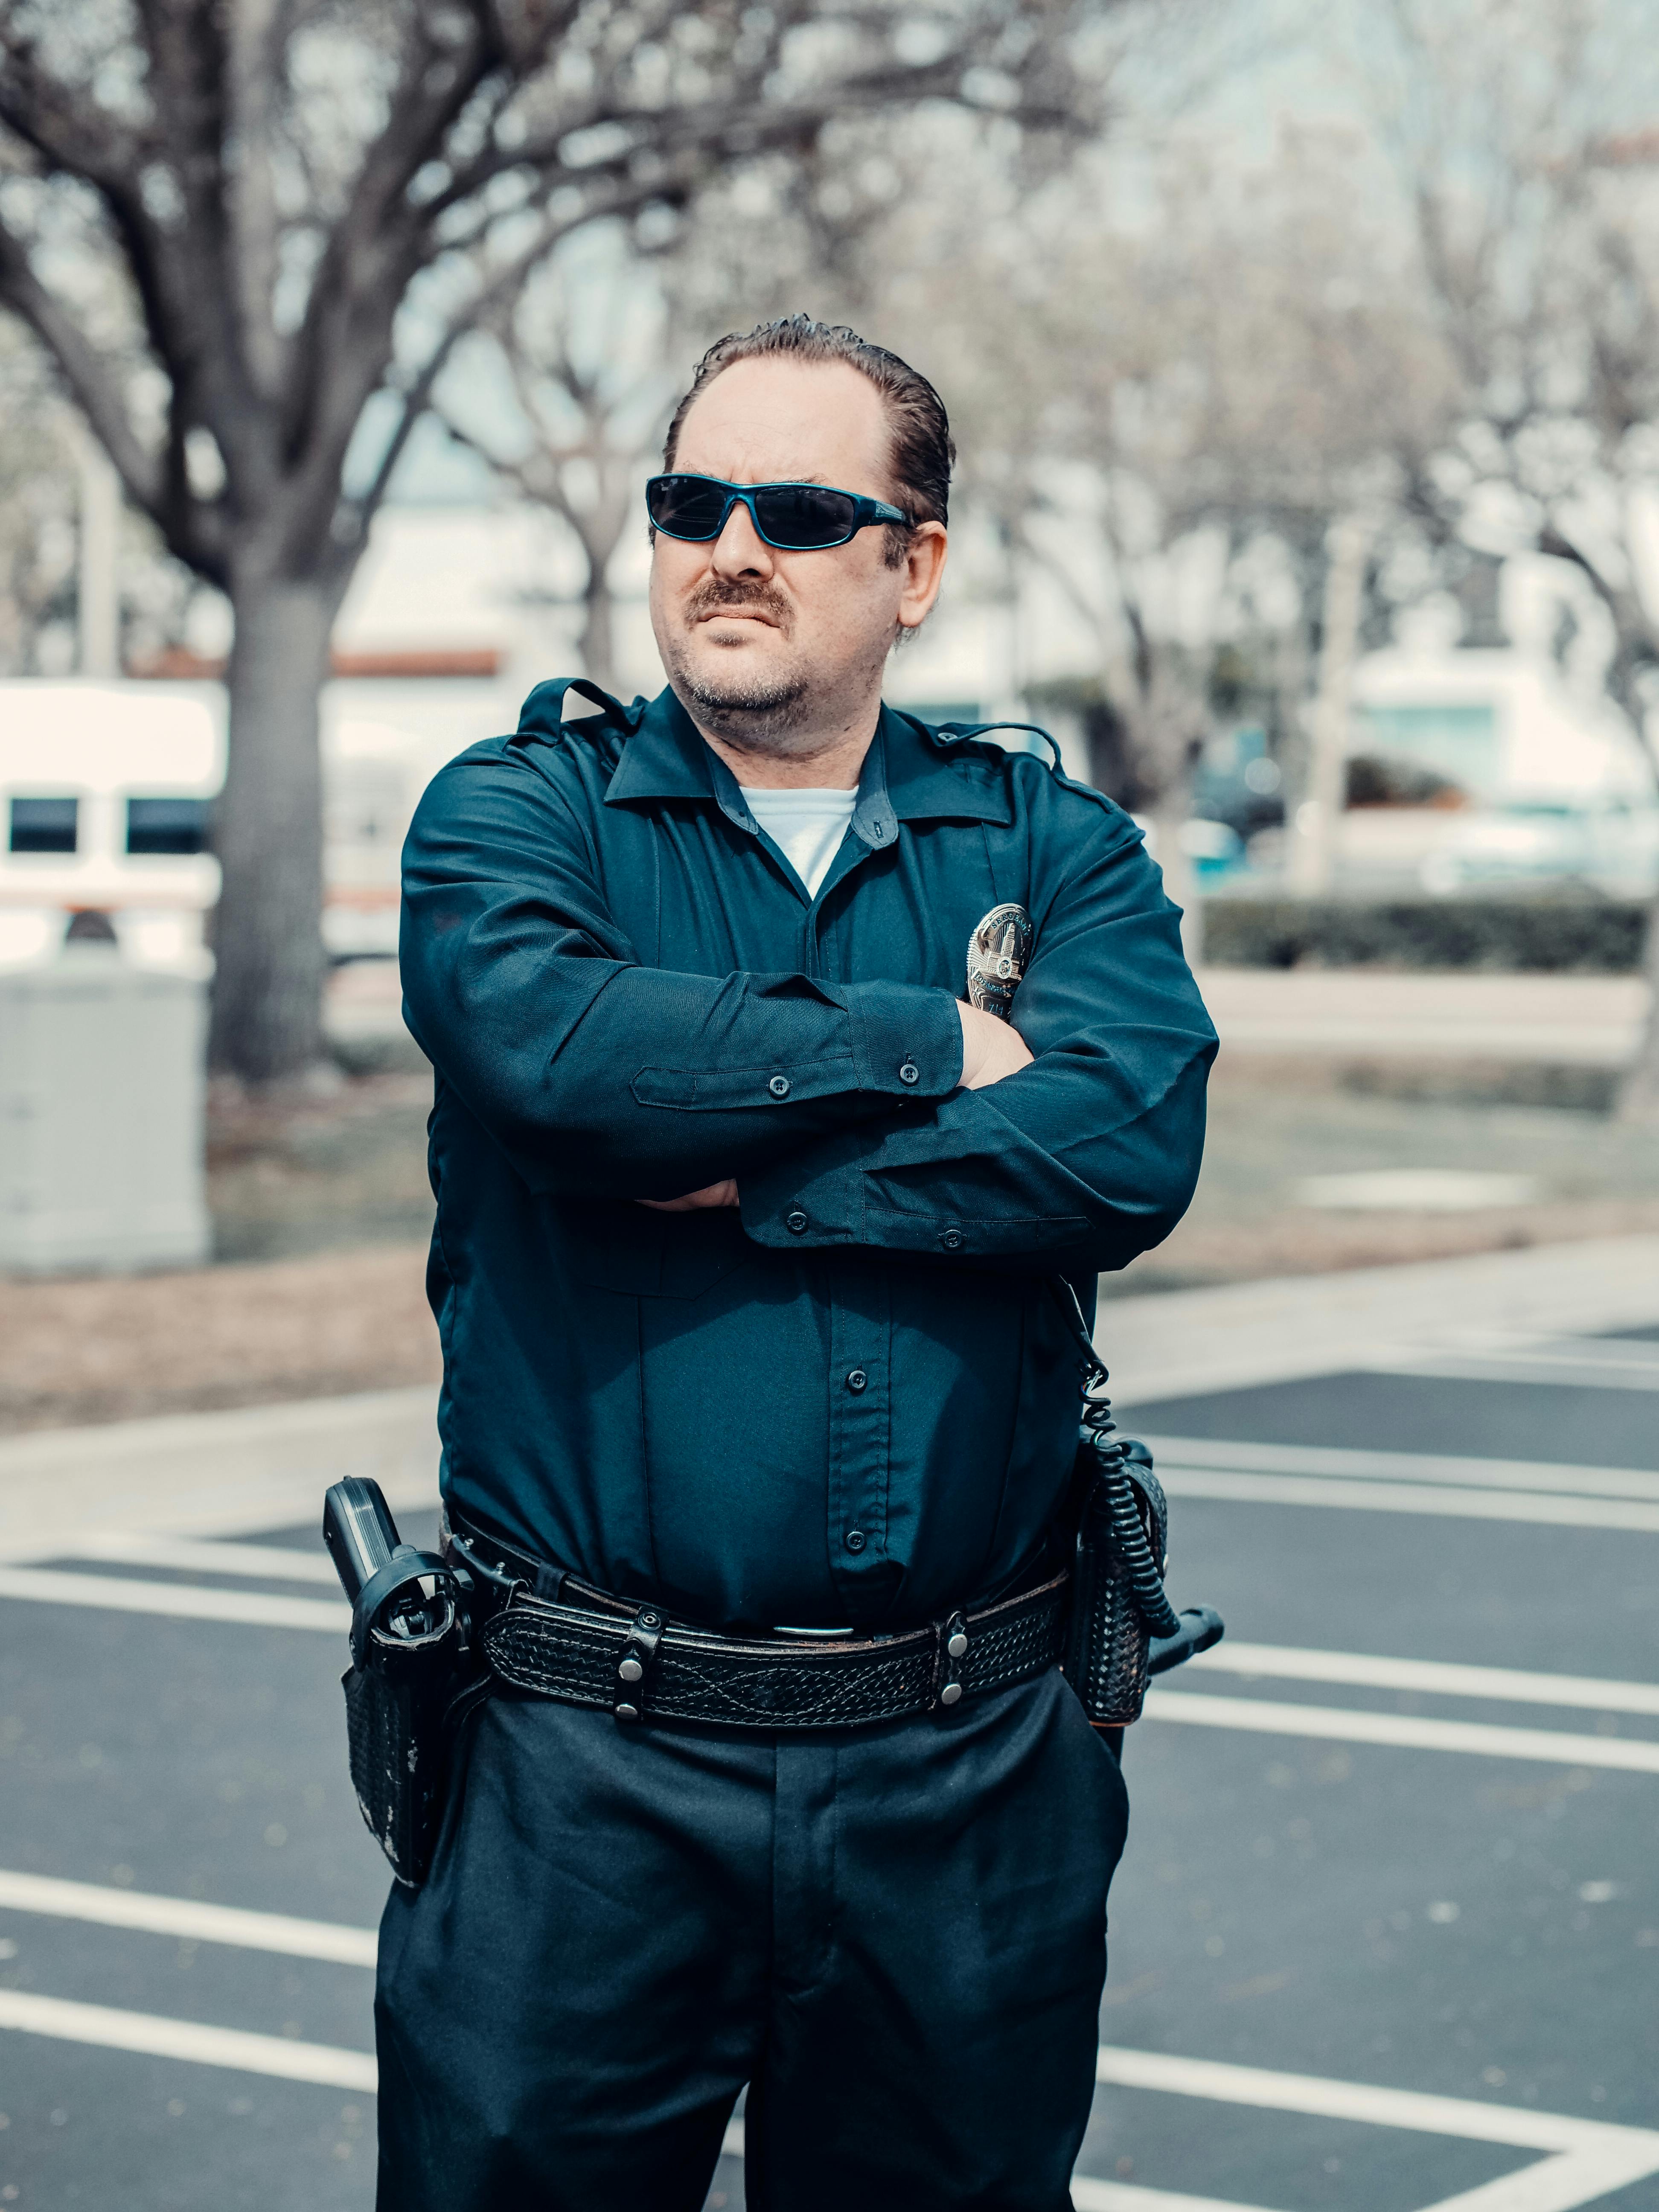 An annoyed policeman with his hands folded against his chest | Source: Pexels